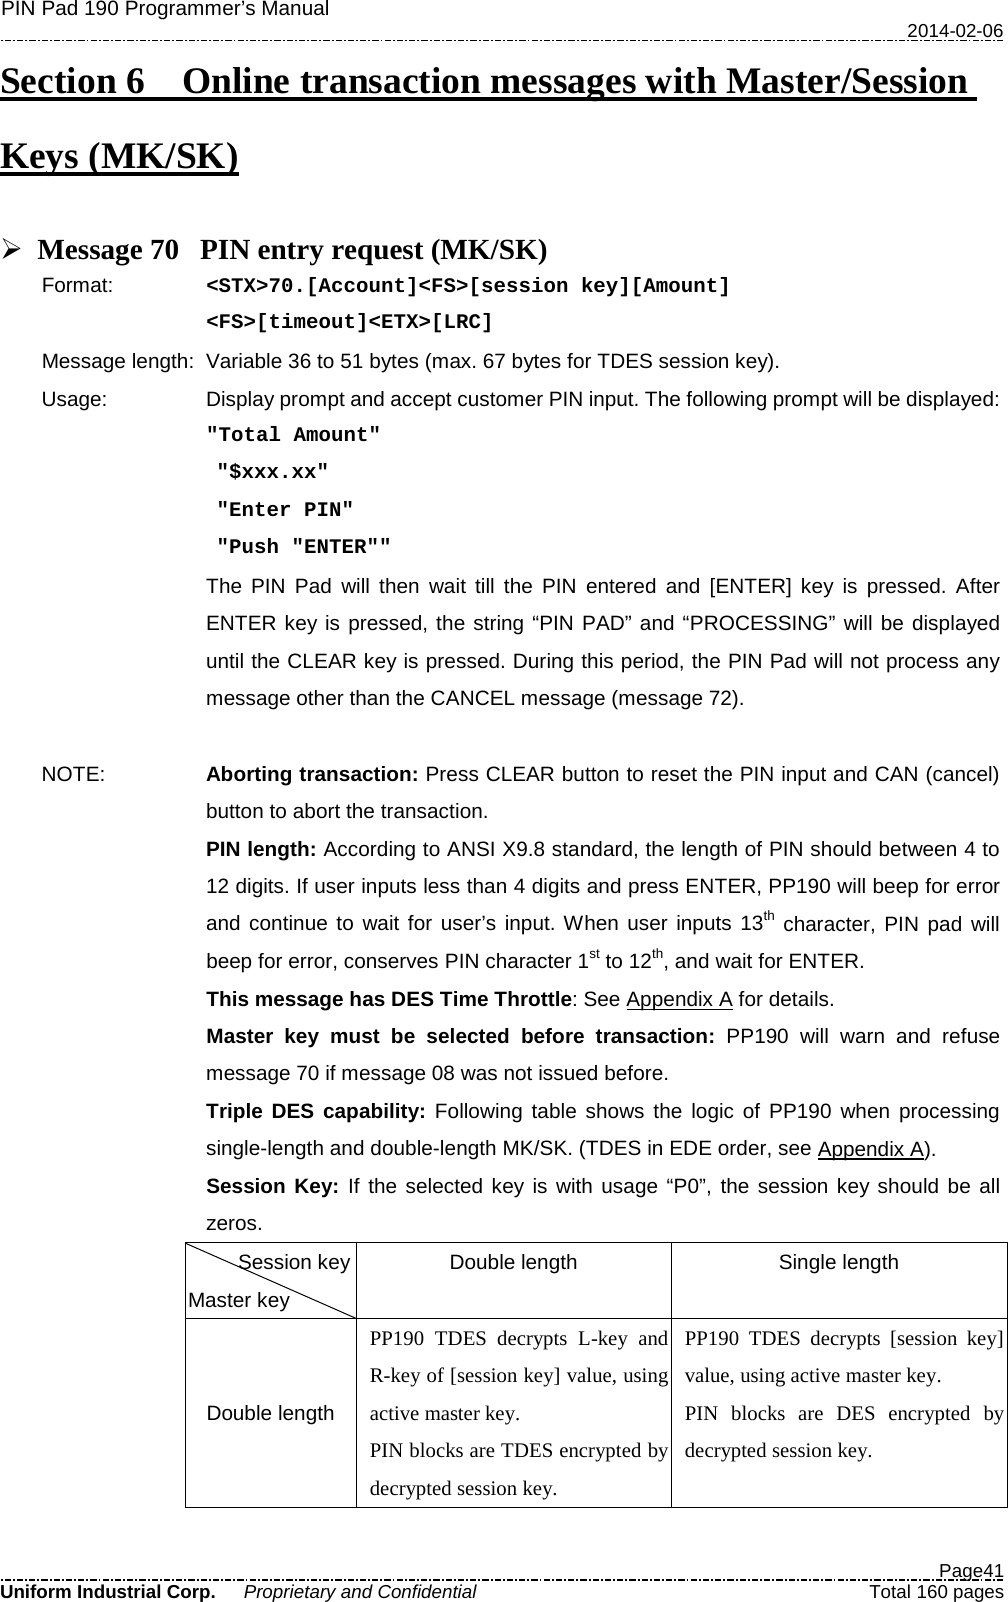 PIN Pad 190 Programmer’s Manual   2014-02-06  Page41 Uniform Industrial Corp. Proprietary and Confidential  Total 160 pages Section 6    Online transaction messages with Master/Session Keys (MK/SK)   Message 70 PIN entry request (MK/SK) Format:   &lt;STX&gt;70.[Account]&lt;FS&gt;[session key][Amount] &lt;FS&gt;[timeout]&lt;ETX&gt;[LRC] Message length: Variable 36 to 51 bytes (max. 67 bytes for TDES session key). Usage: Display prompt and accept customer PIN input. The following prompt will be displayed:  &quot;Total Amount&quot;  &quot;$xxx.xx&quot;  &quot;Enter PIN&quot;  &quot;Push &quot;ENTER&quot;&quot;  The PIN Pad will then wait till the PIN entered and [ENTER]  key is pressed. After ENTER key is pressed, the string “PIN PAD” and “PROCESSING” will be displayed until the CLEAR key is pressed. During this period, the PIN Pad will not process any message other than the CANCEL message (message 72).  NOTE: Aborting transaction: Press CLEAR button to reset the PIN input and CAN (cancel) button to abort the transaction. PIN length: According to ANSI X9.8 standard, the length of PIN should between 4 to 12 digits. If user inputs less than 4 digits and press ENTER, PP190 will beep for error and continue to wait for user’s input. When user inputs 13th character, PIN pad will beep for error, conserves PIN character 1st to 12th, and wait for ENTER. This message has DES Time Throttle: See Appendix A for details. Master key must be selected before transaction: PP190 will warn and refuse message 70 if message 08 was not issued before. Triple DES capability: Following table shows the logic of PP190 when processing single-length and double-length MK/SK. (TDES in EDE order, see Appendix A).  Session Key: If the selected key is with usage “P0”, the session key should be all zeros.  Session key Master key Double length Single length Double length PP190 TDES decrypts L-key and R-key of [session key] value, using active master key. PIN blocks are TDES encrypted by decrypted session key. PP190 TDES decrypts [session key] value, using active master key. PIN blocks are DES  encrypted by decrypted session key. 